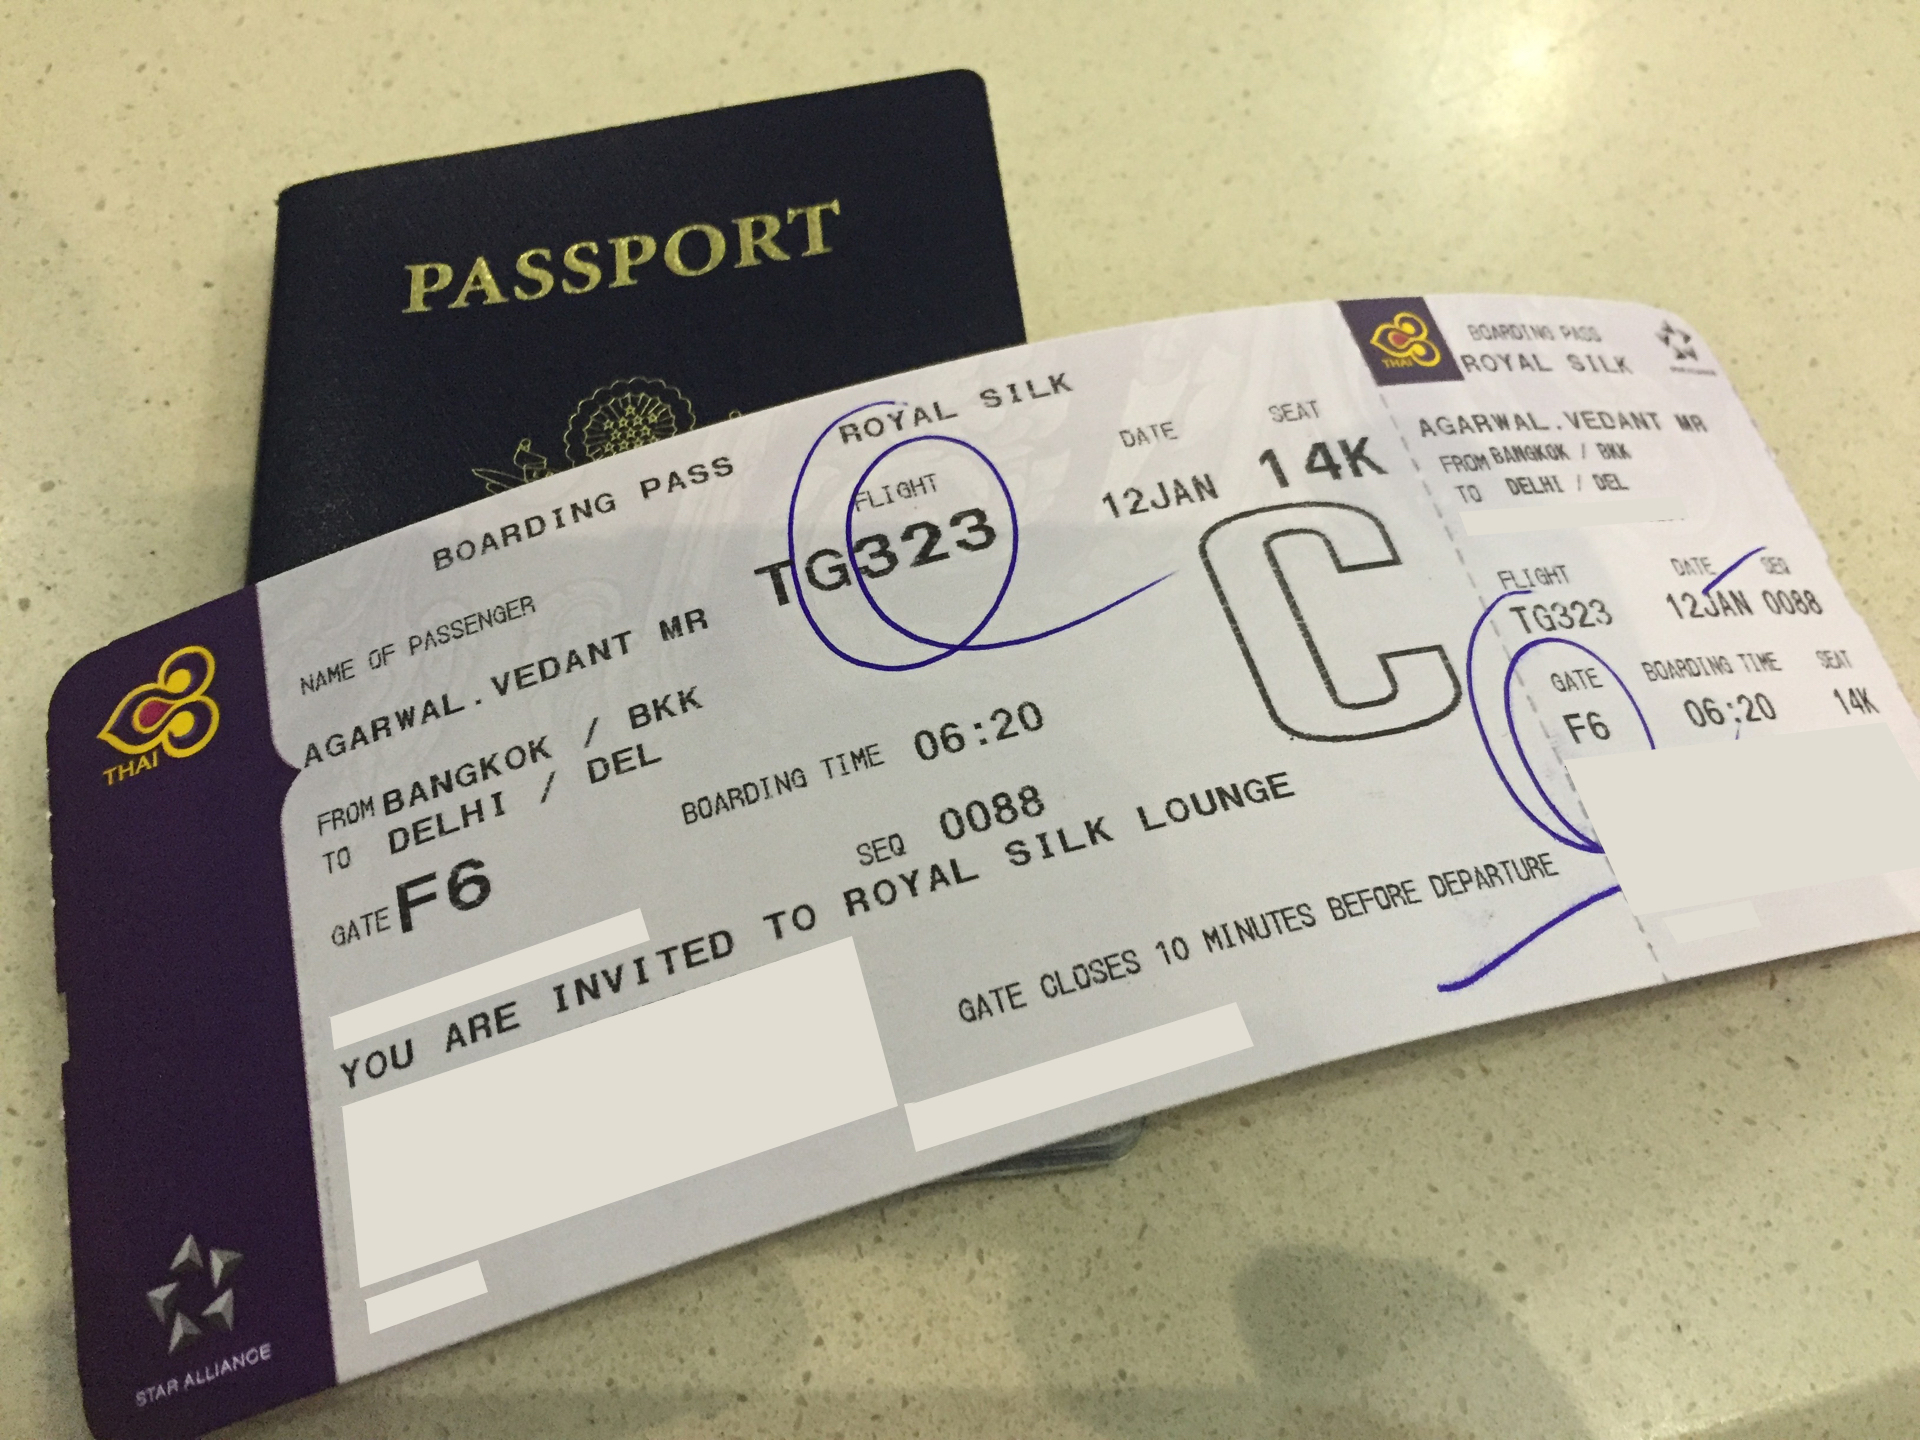 Inflight review: Thai Airways: A330: Royal Silk Business